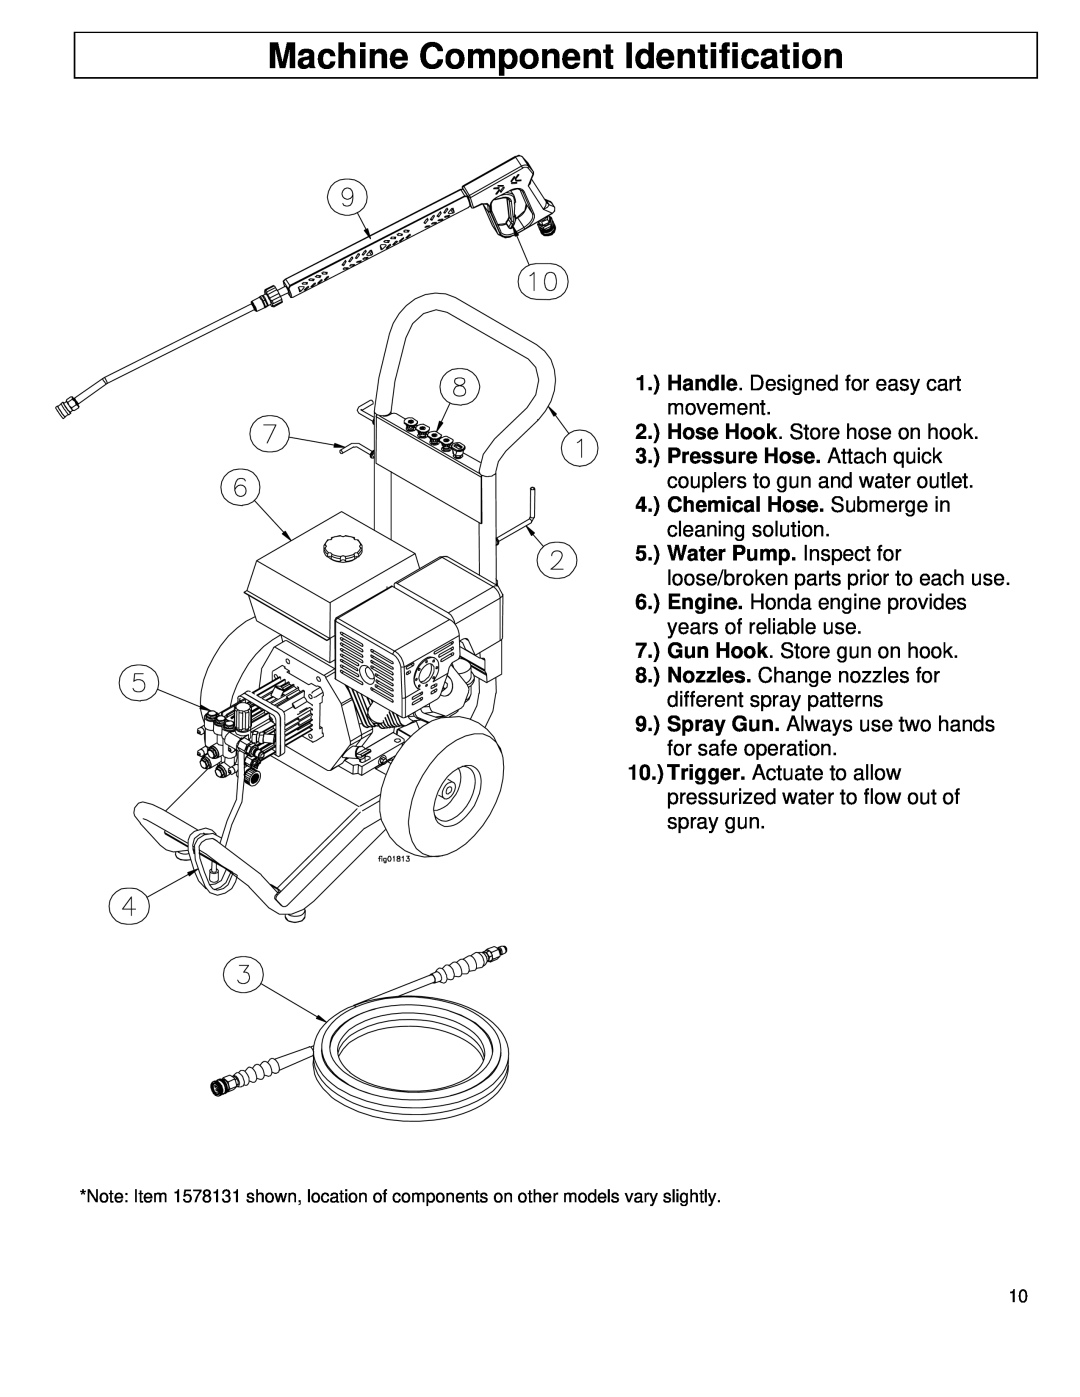 North Star M1578111F owner manual Machine Component Identification 